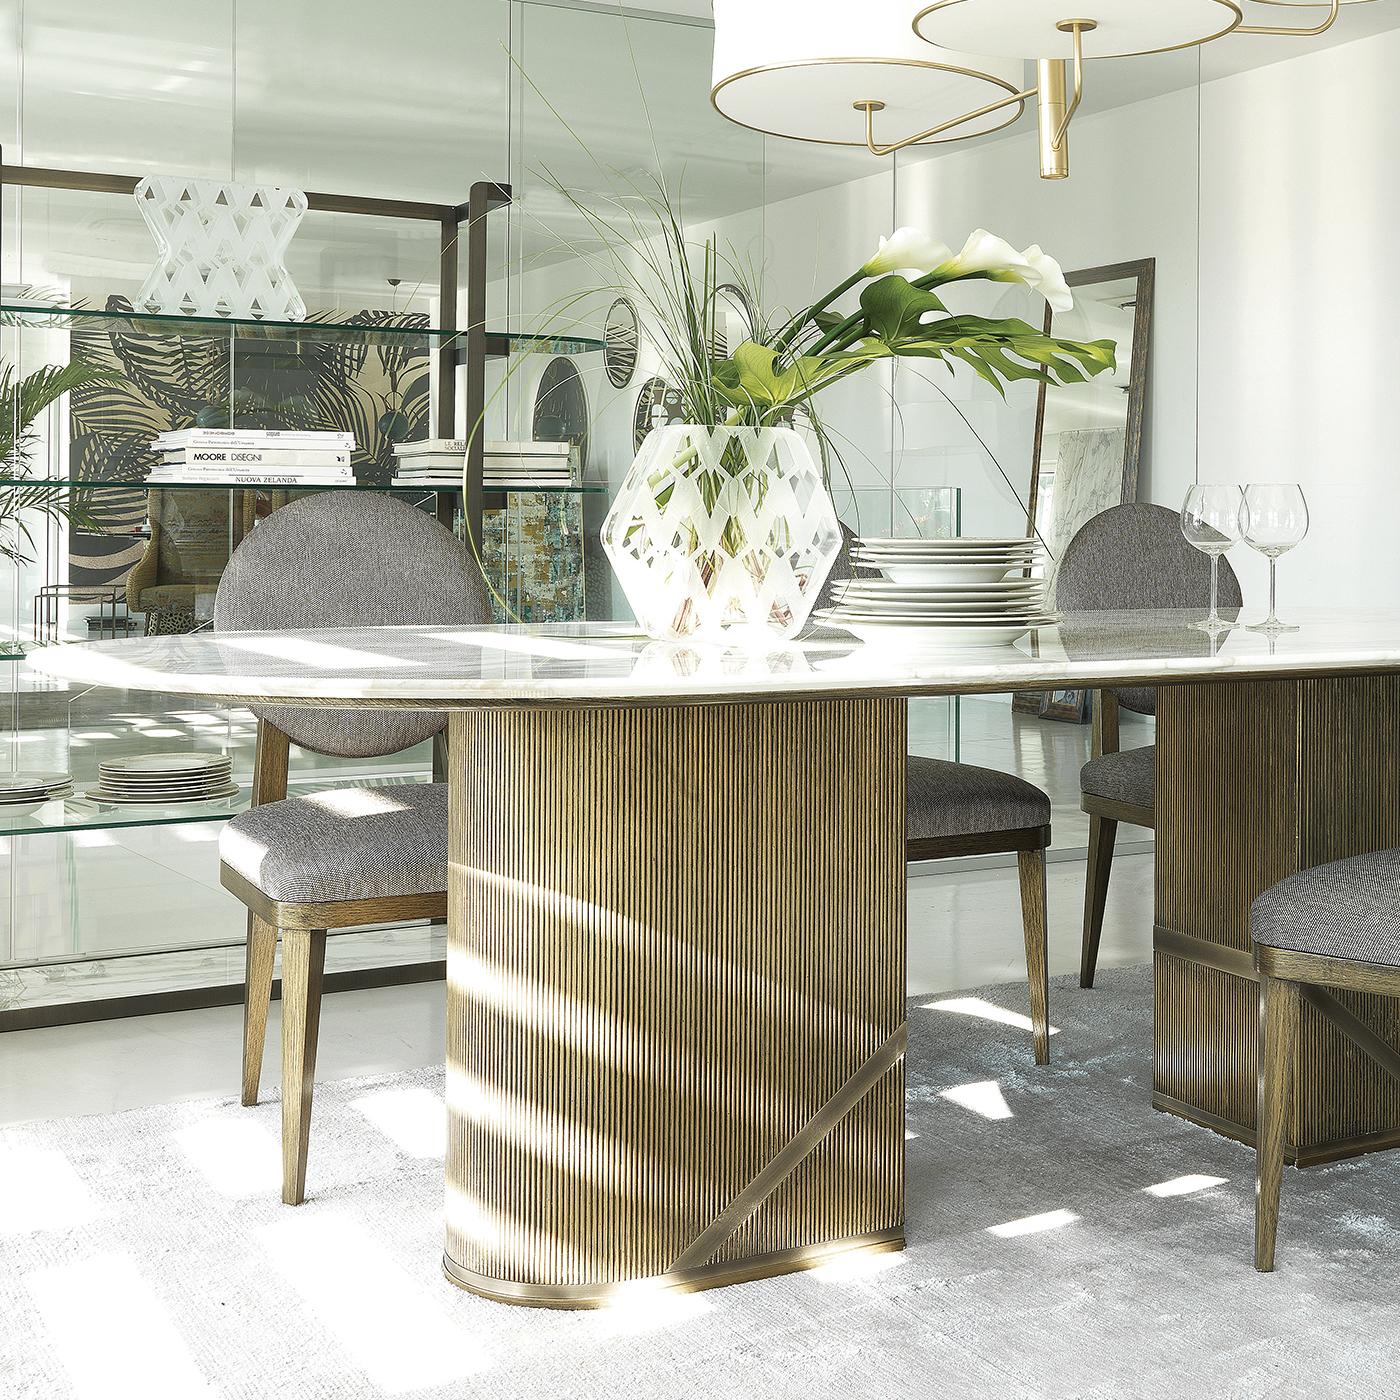 A stunning complement to the Envelope Bookcase, this superb dining table is a magnificent addition to a modern or contemporary home. The elliptical top in exquisite Calcatta Oro marble gives a sumptuous allure to the piece and the natural veins of